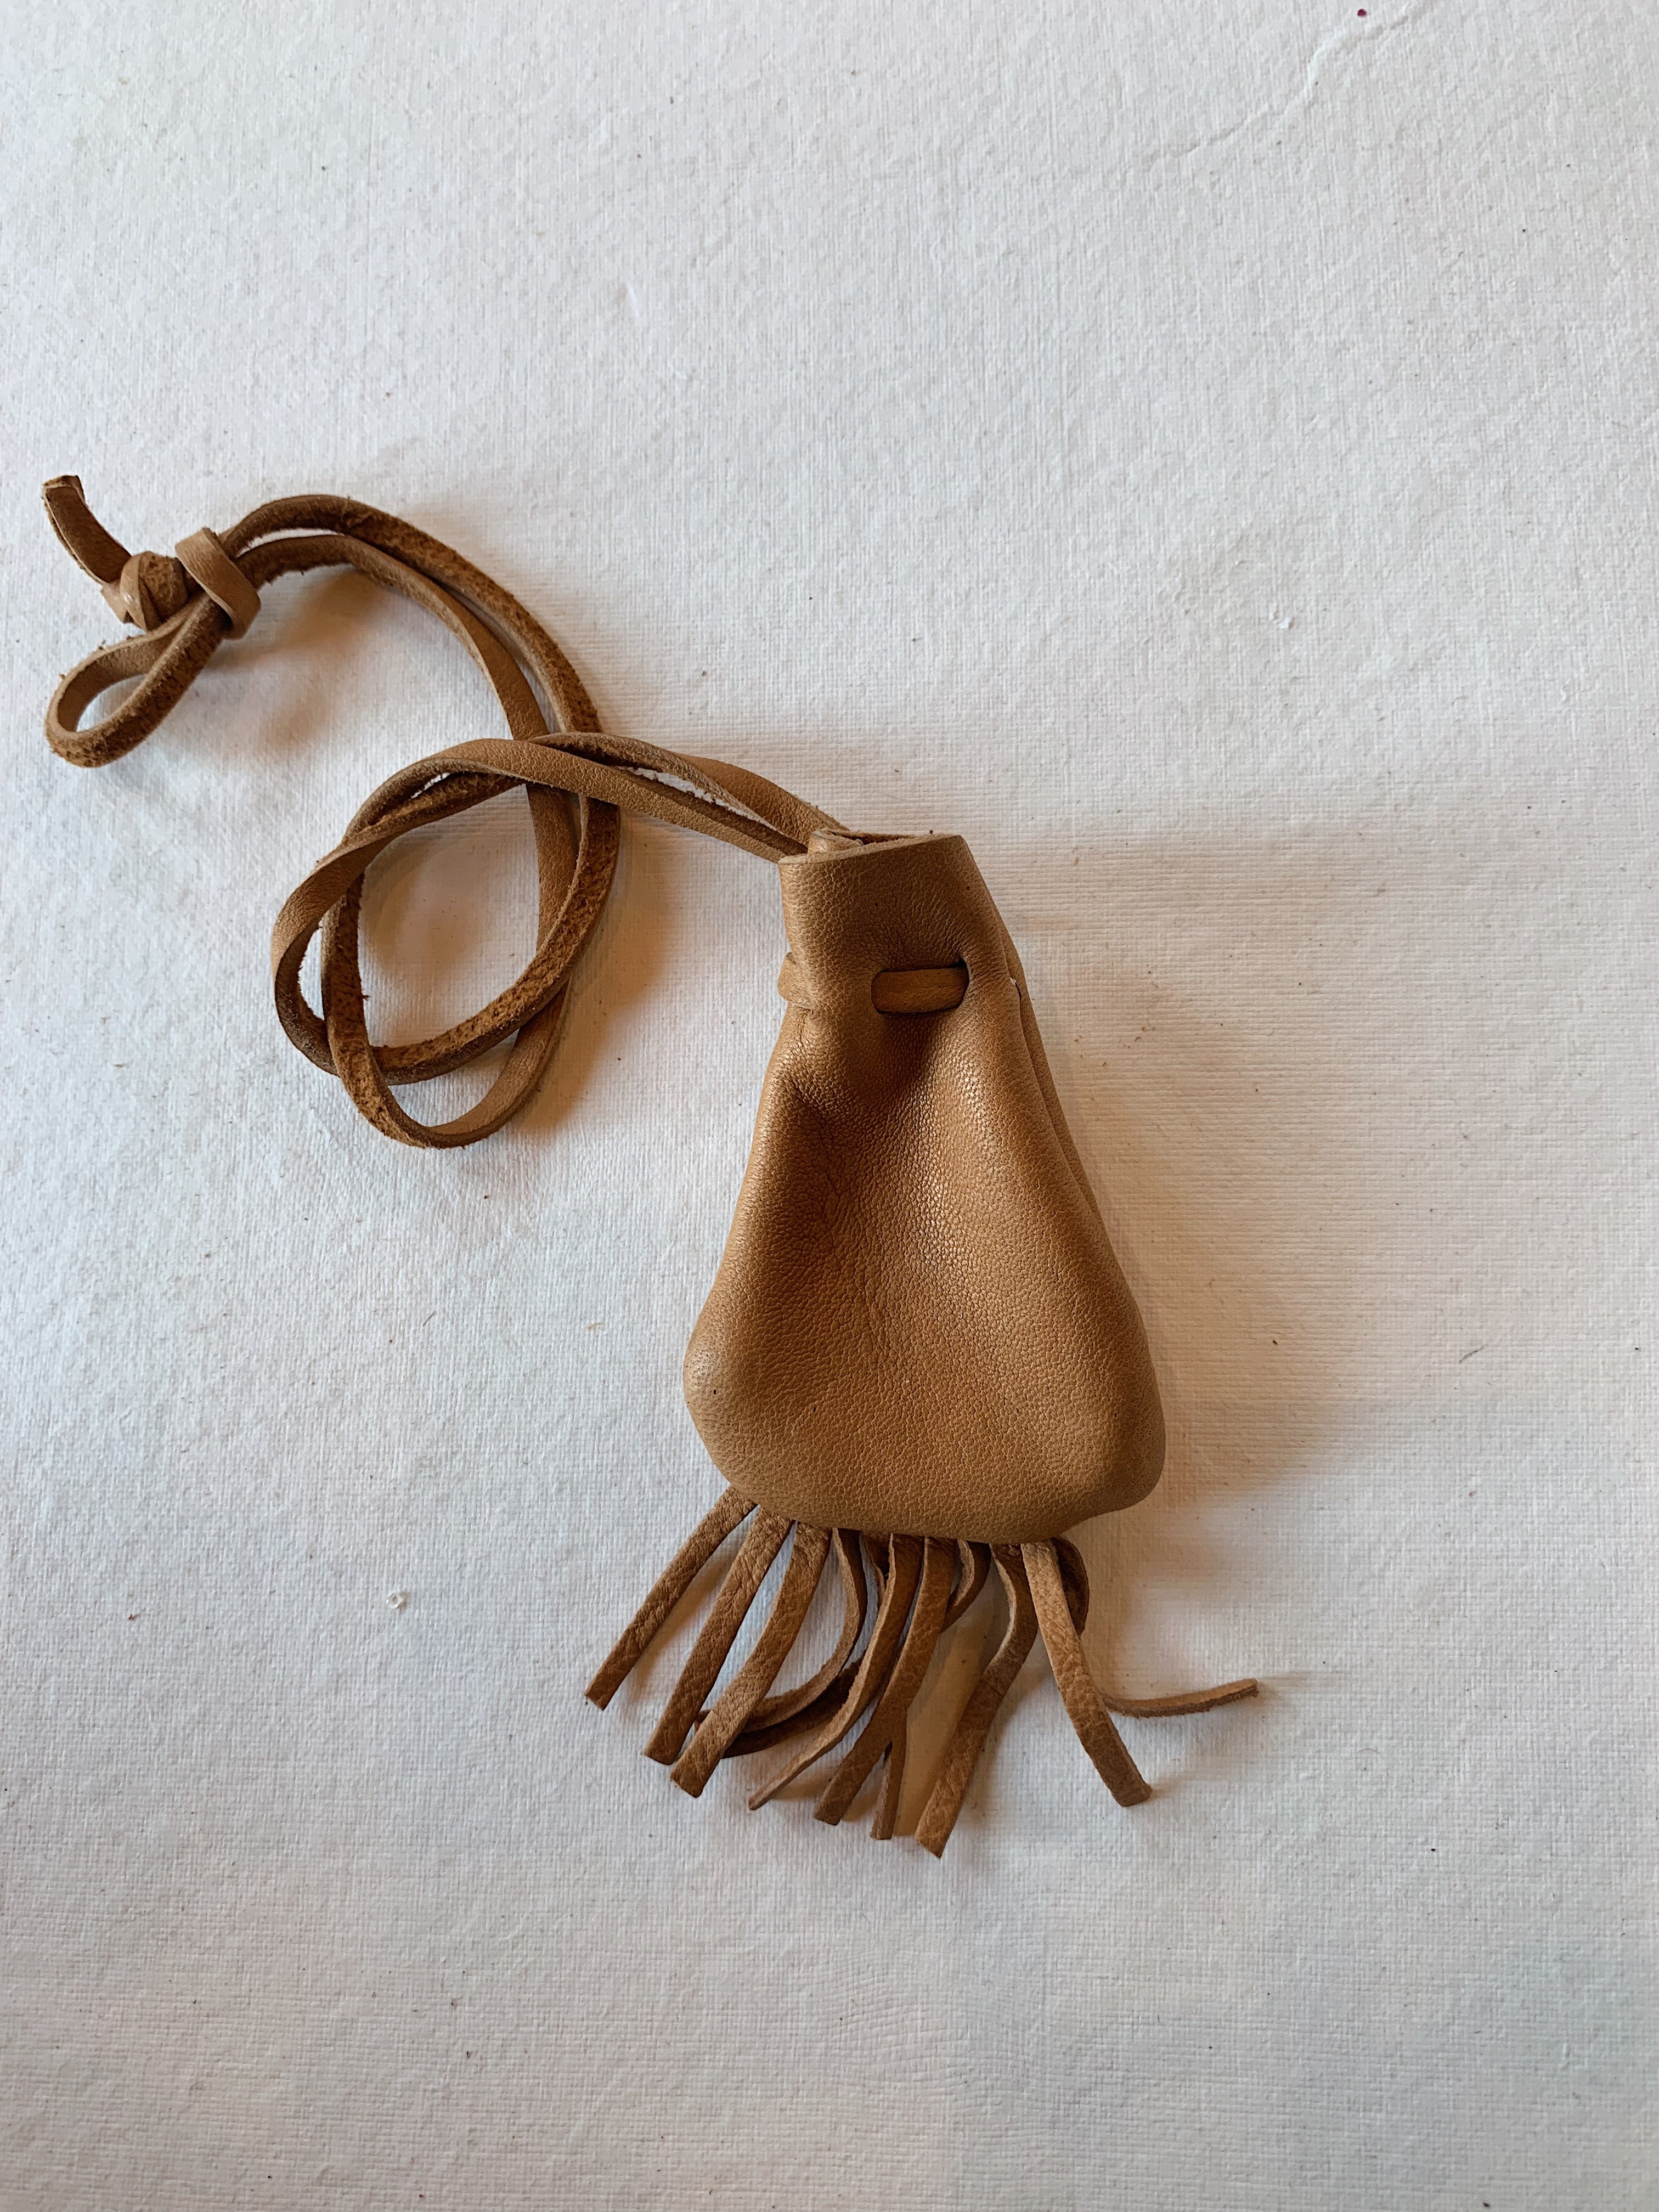 3.5" Leather Drawstring Medicine Pouch Necklace, CA36